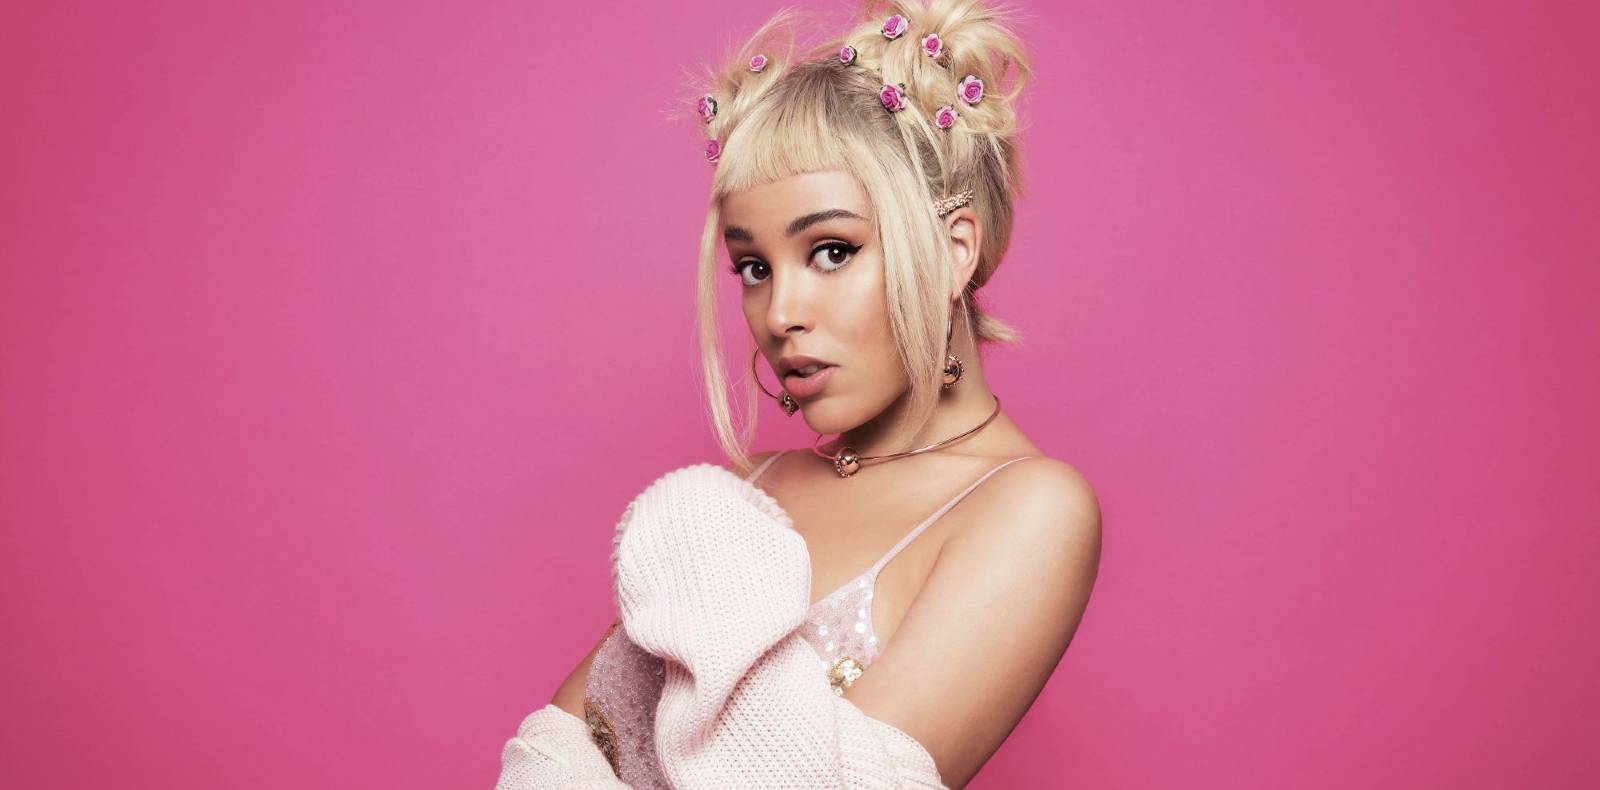 Doja Cat Net Worth 2022- Early Life, Career, Personal life, Quotes